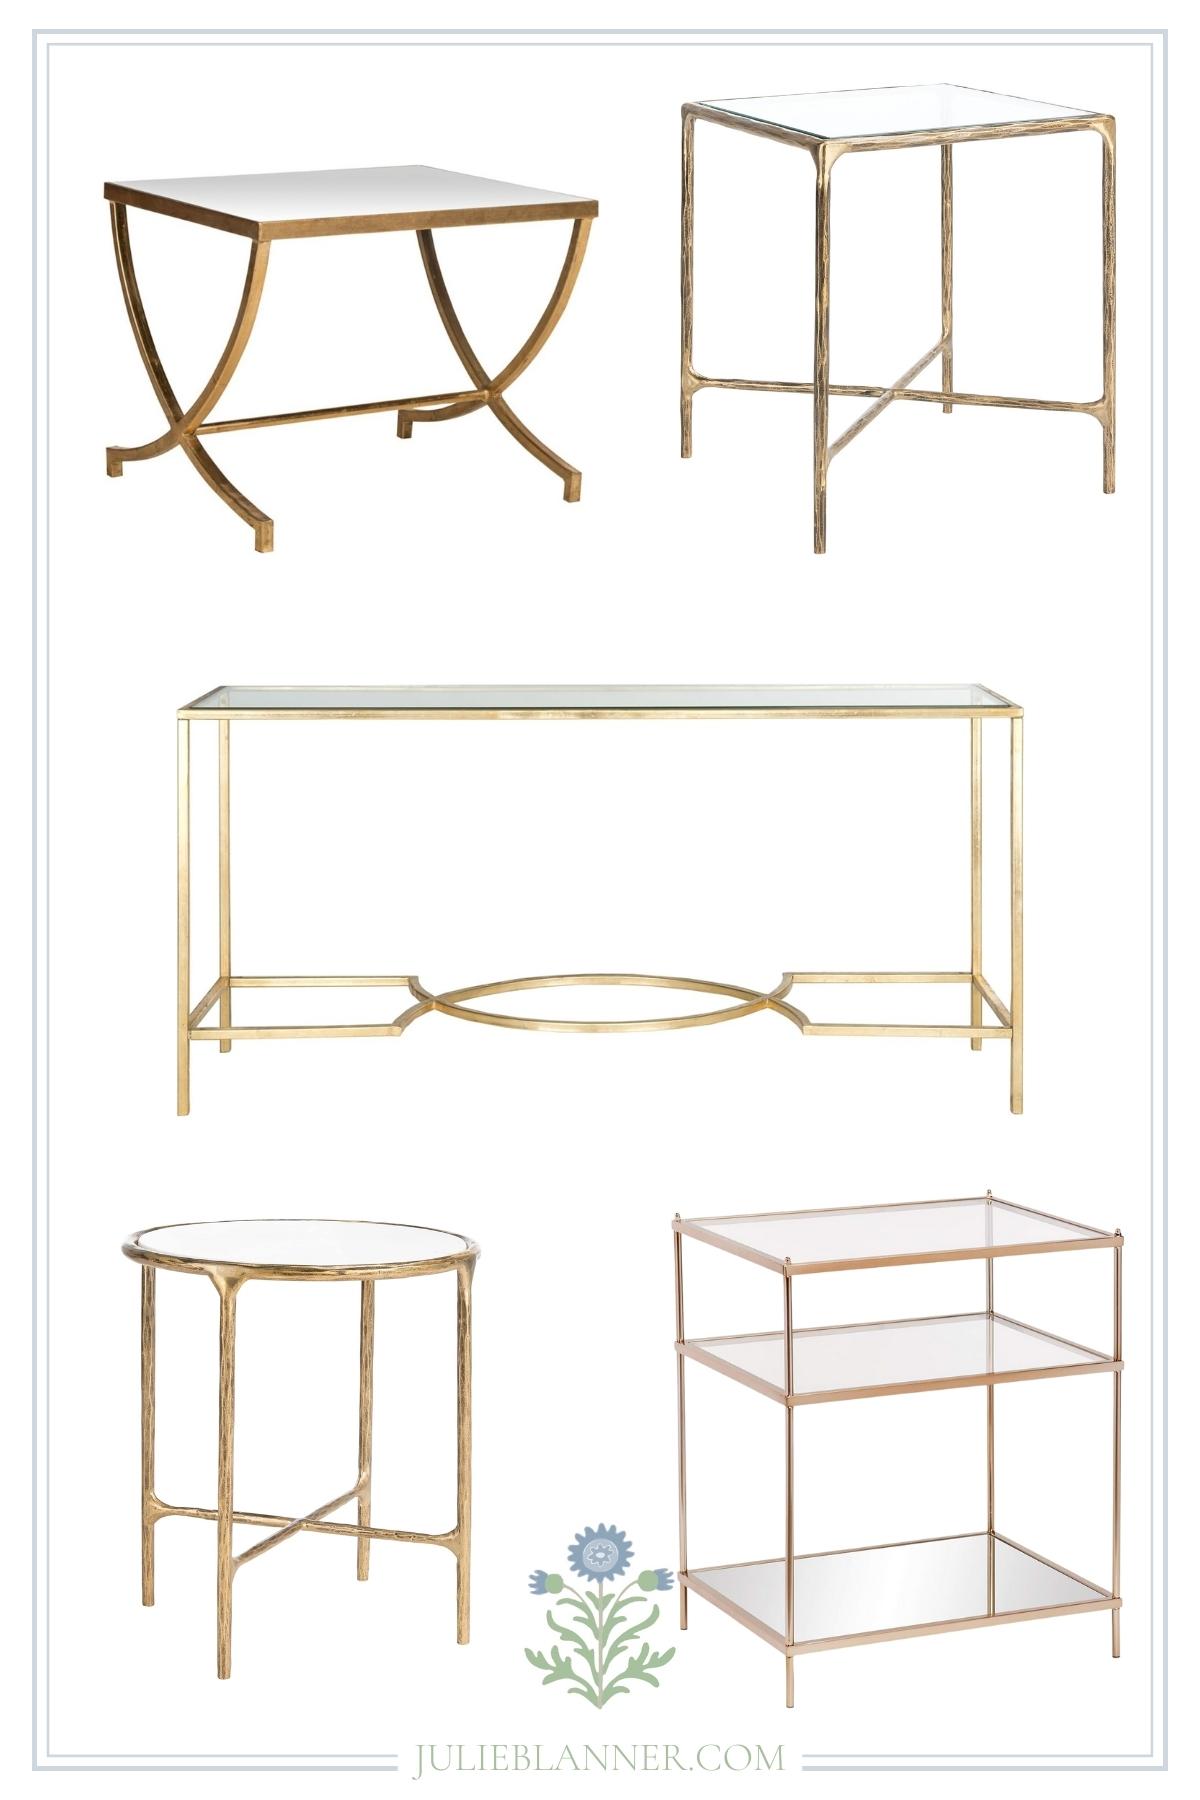 A graphic image featuring a variety of gold amazon furniture